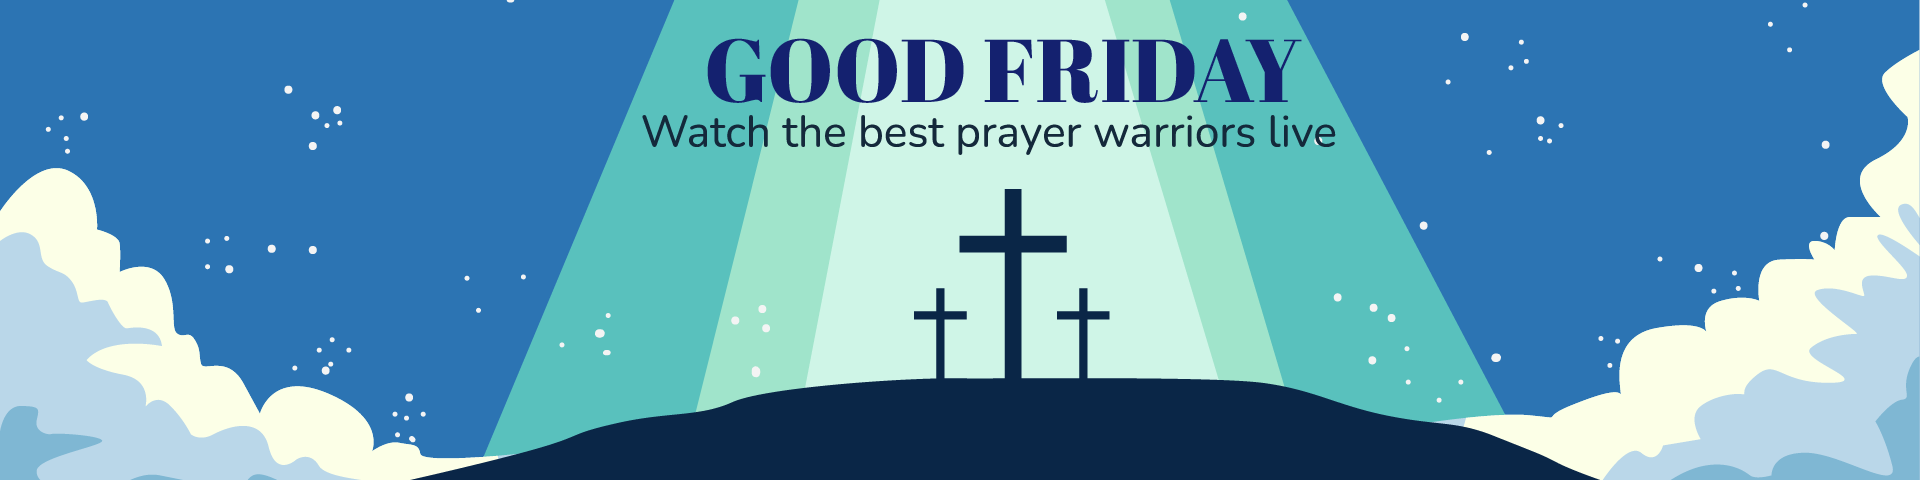 Free Good Friday Twitch Banner in Illustrator, PSD, EPS, SVG, JPG, PNG